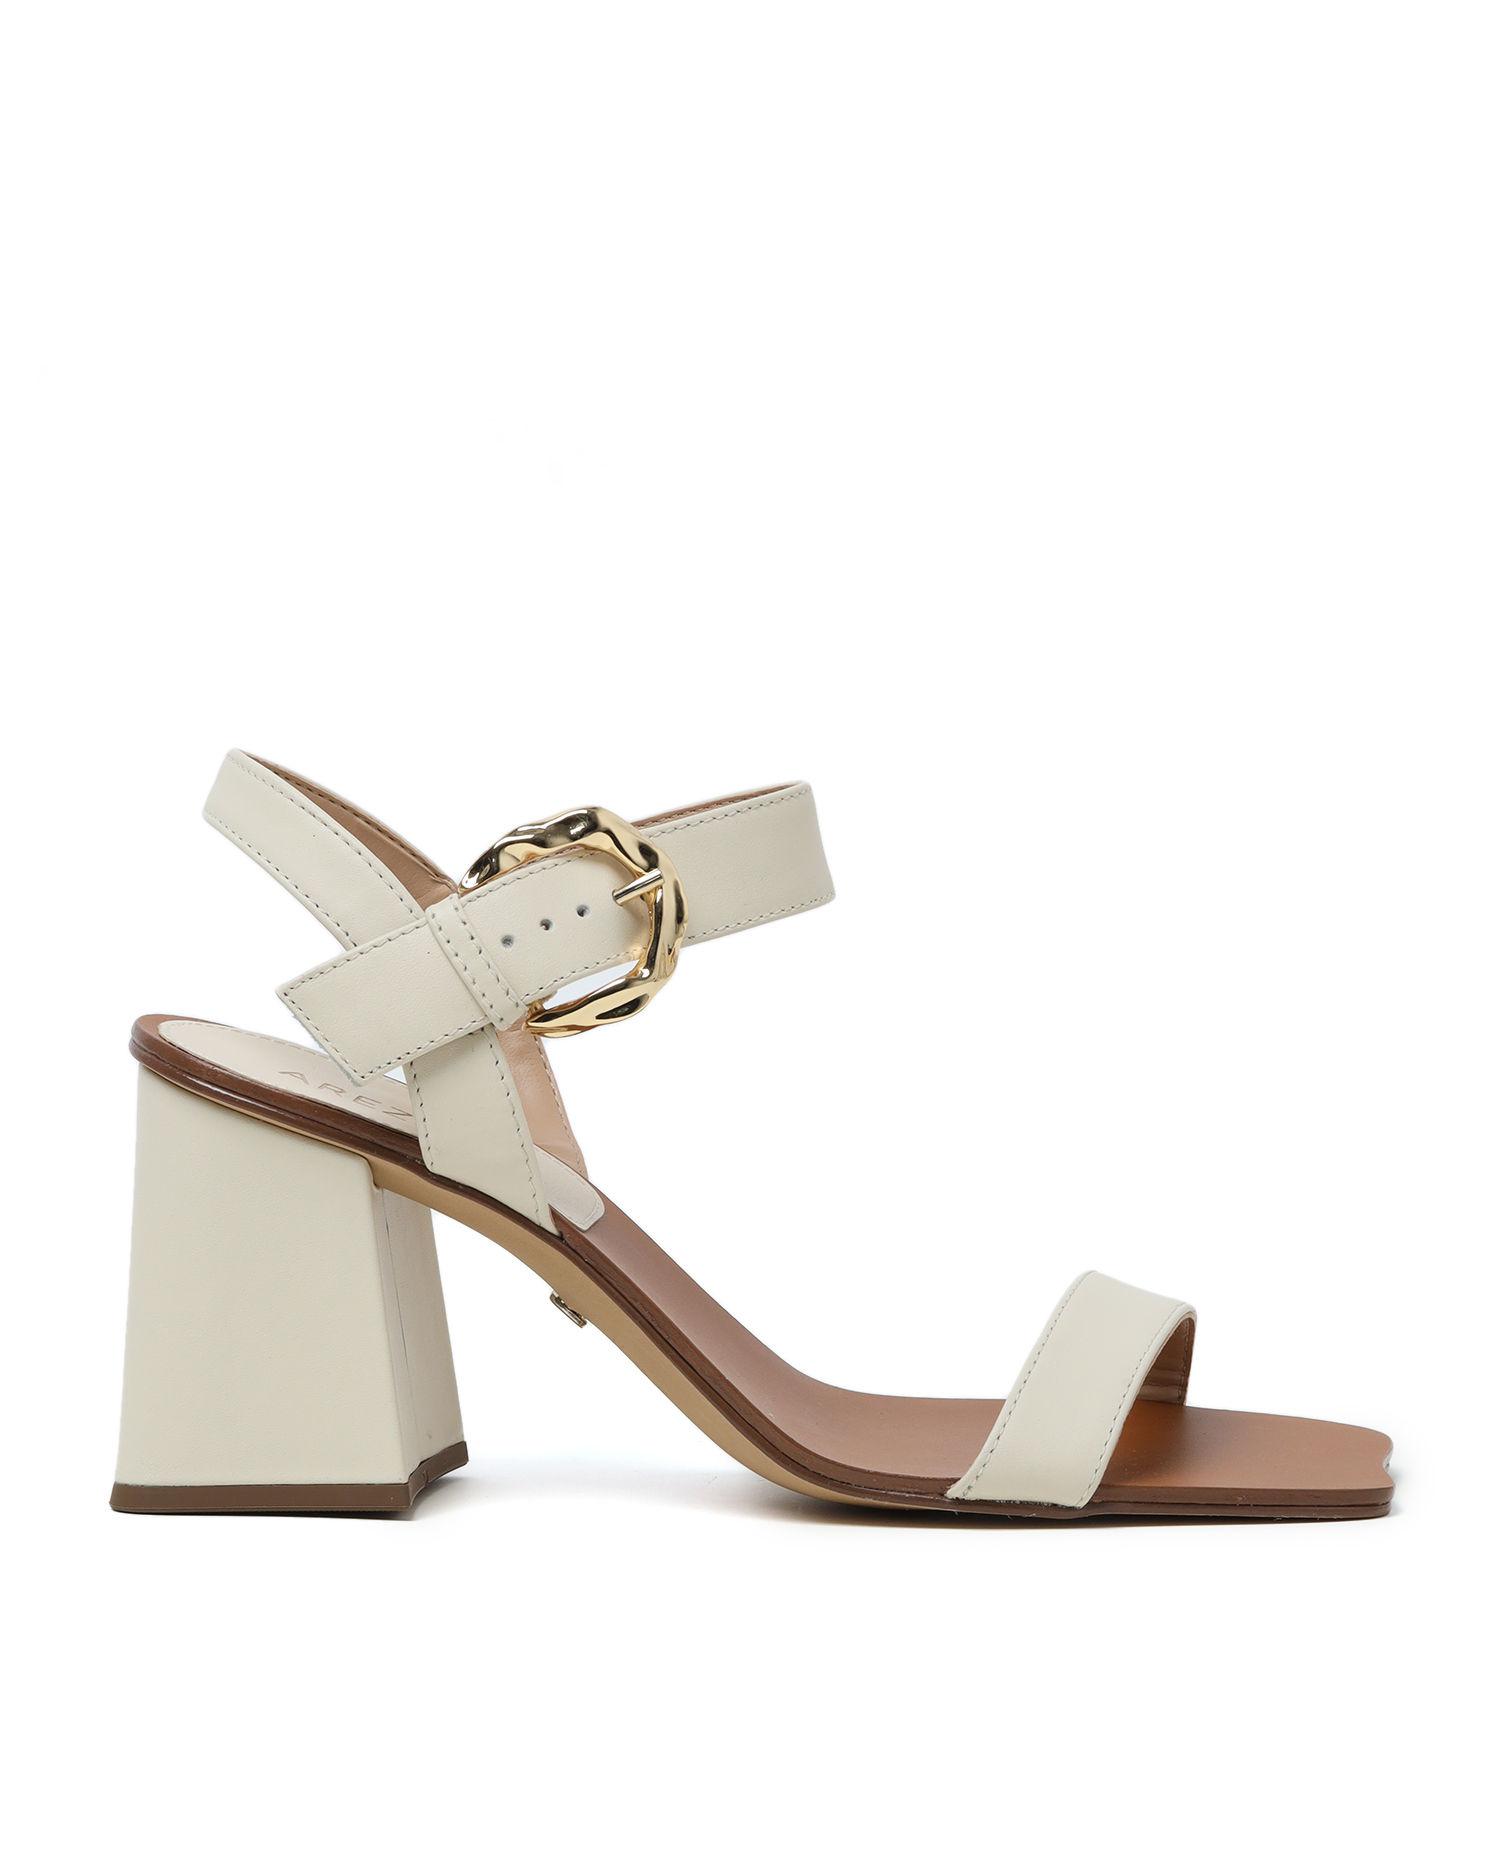 Wedge sandals by AREZZO